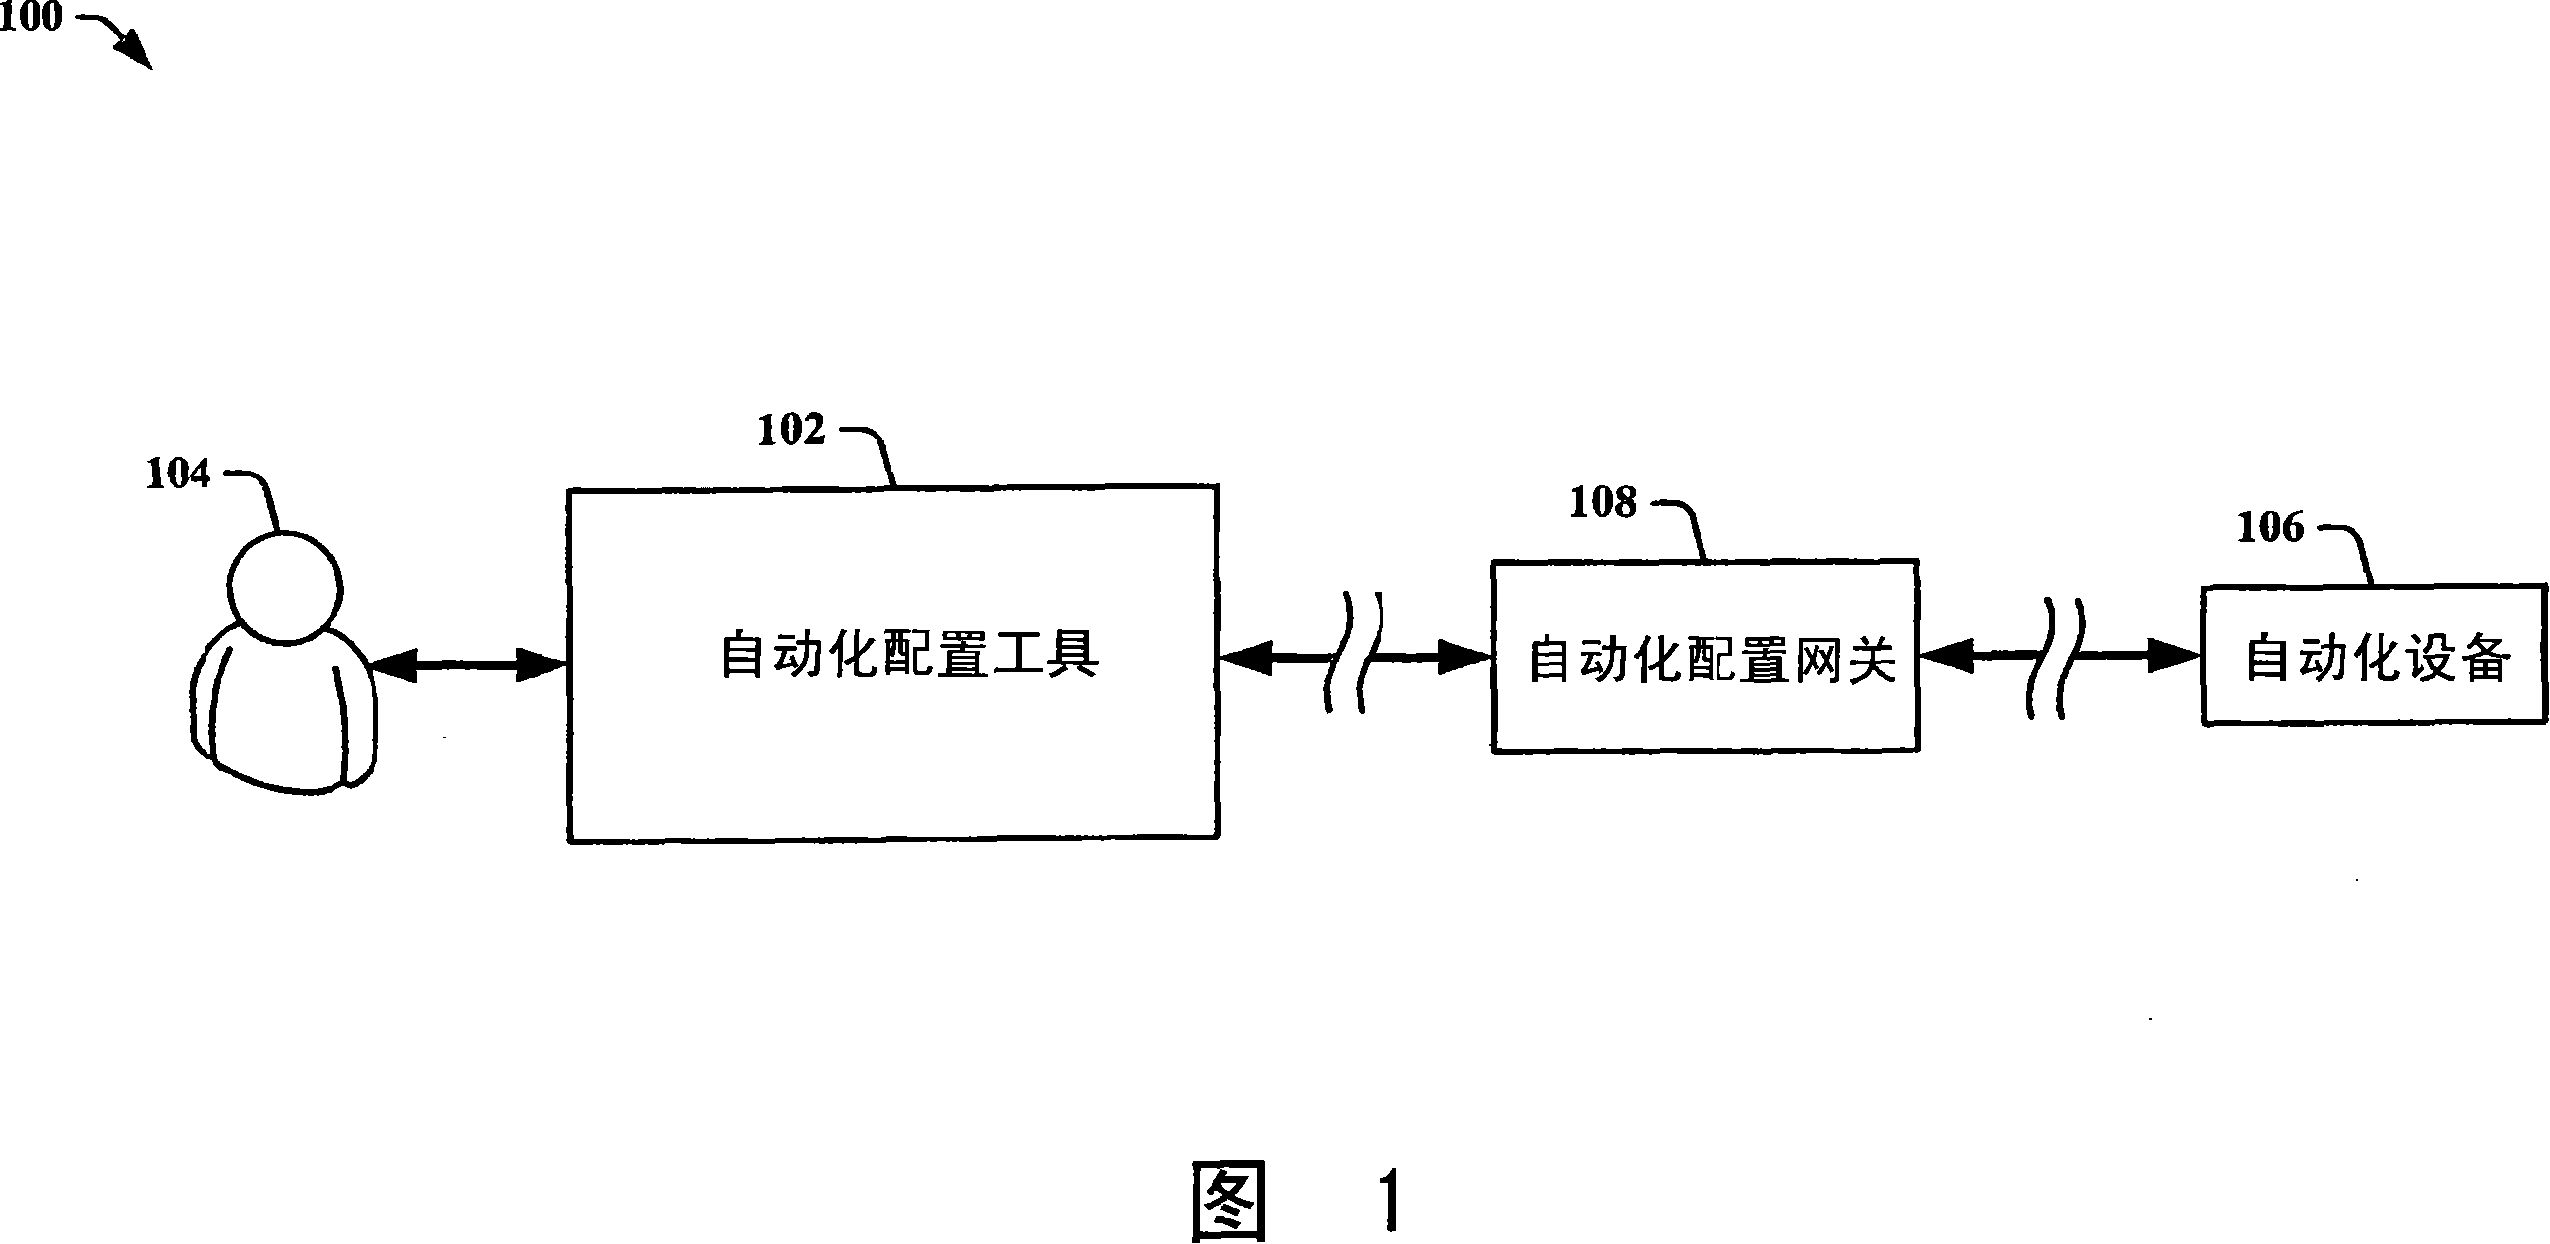 Web-based configuration of distributed automation systems